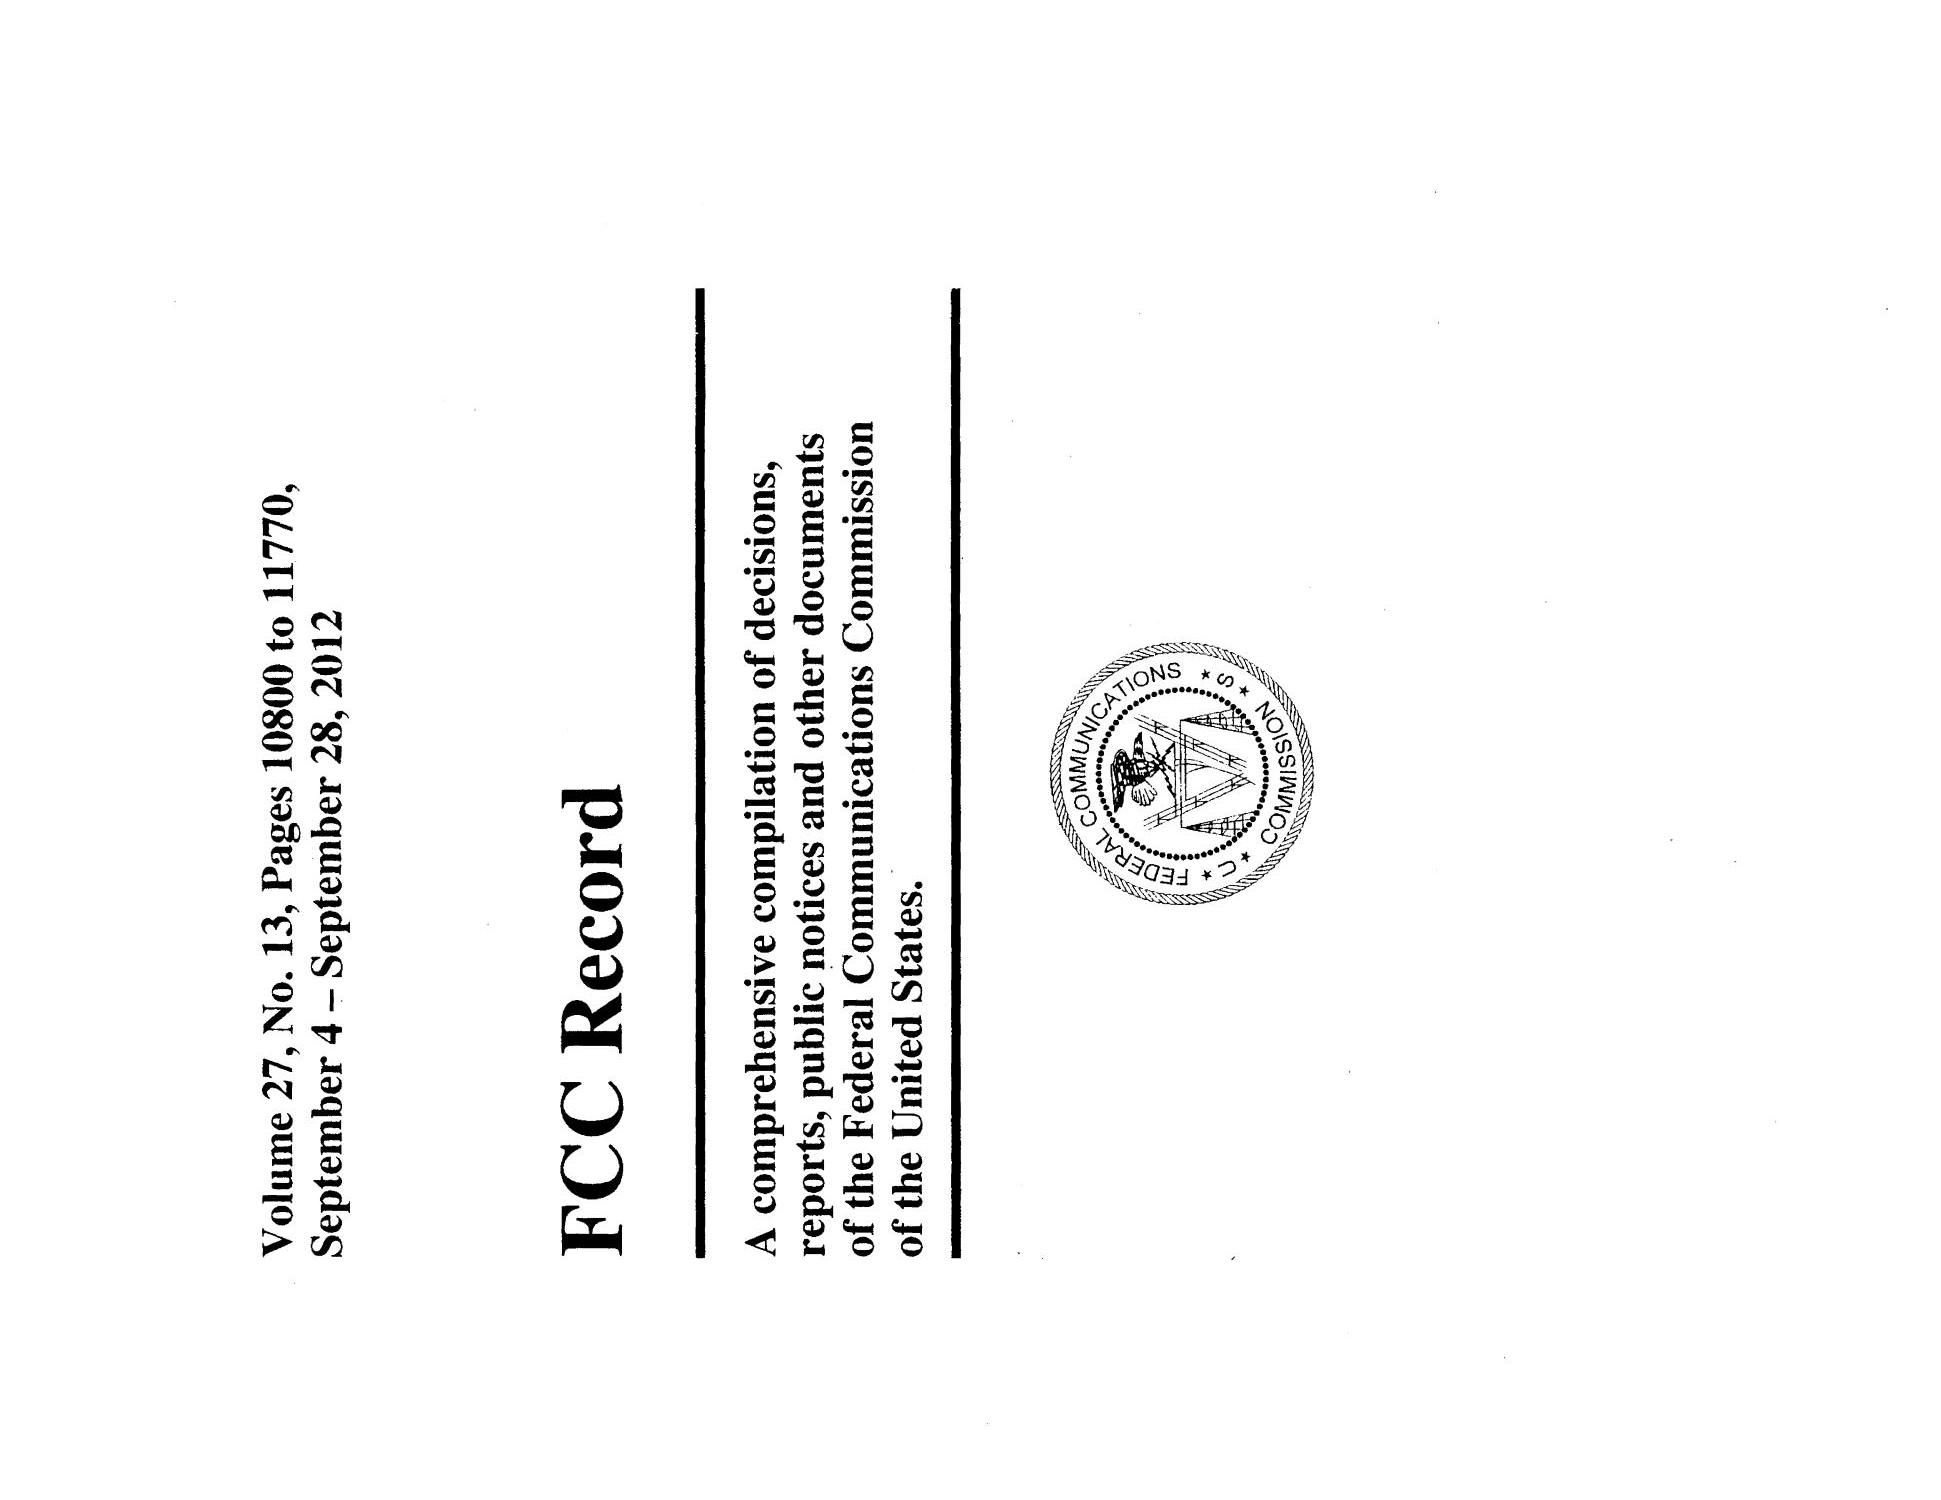 FCC Record, Volume 27, No. 13, Pages 10800 to 11770, September 4 - September 28, 2012
                                                
                                                    Title Page
                                                